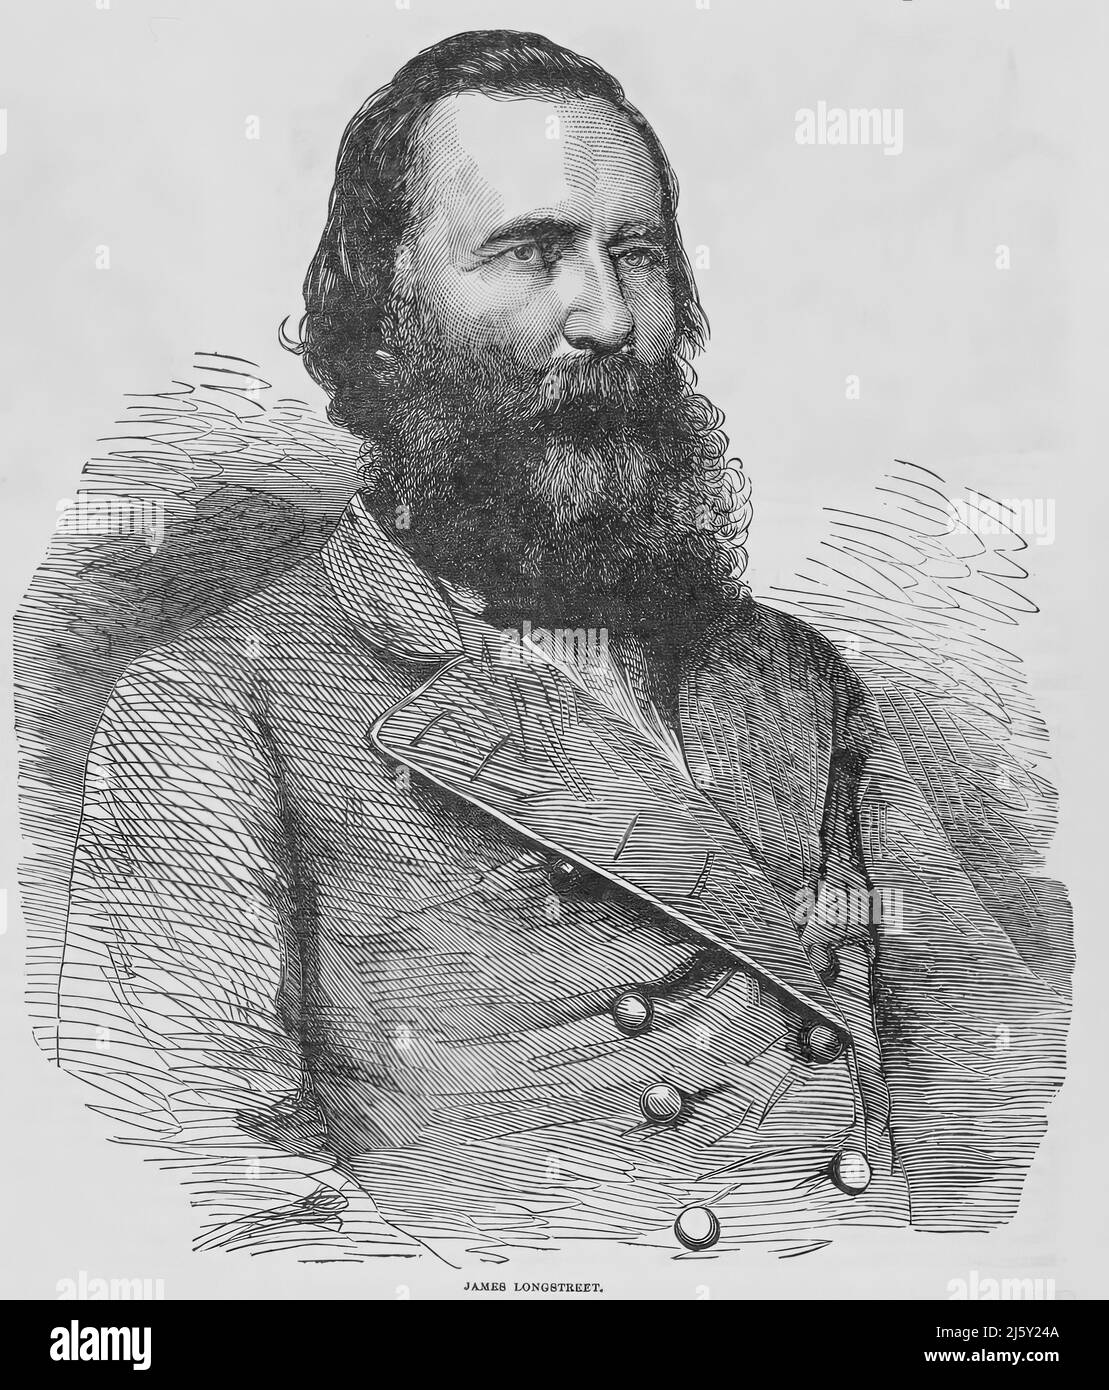 Portrait of James Longstreet, Confederate Army General in the American Civil War. 19th century illustration Stock Photo